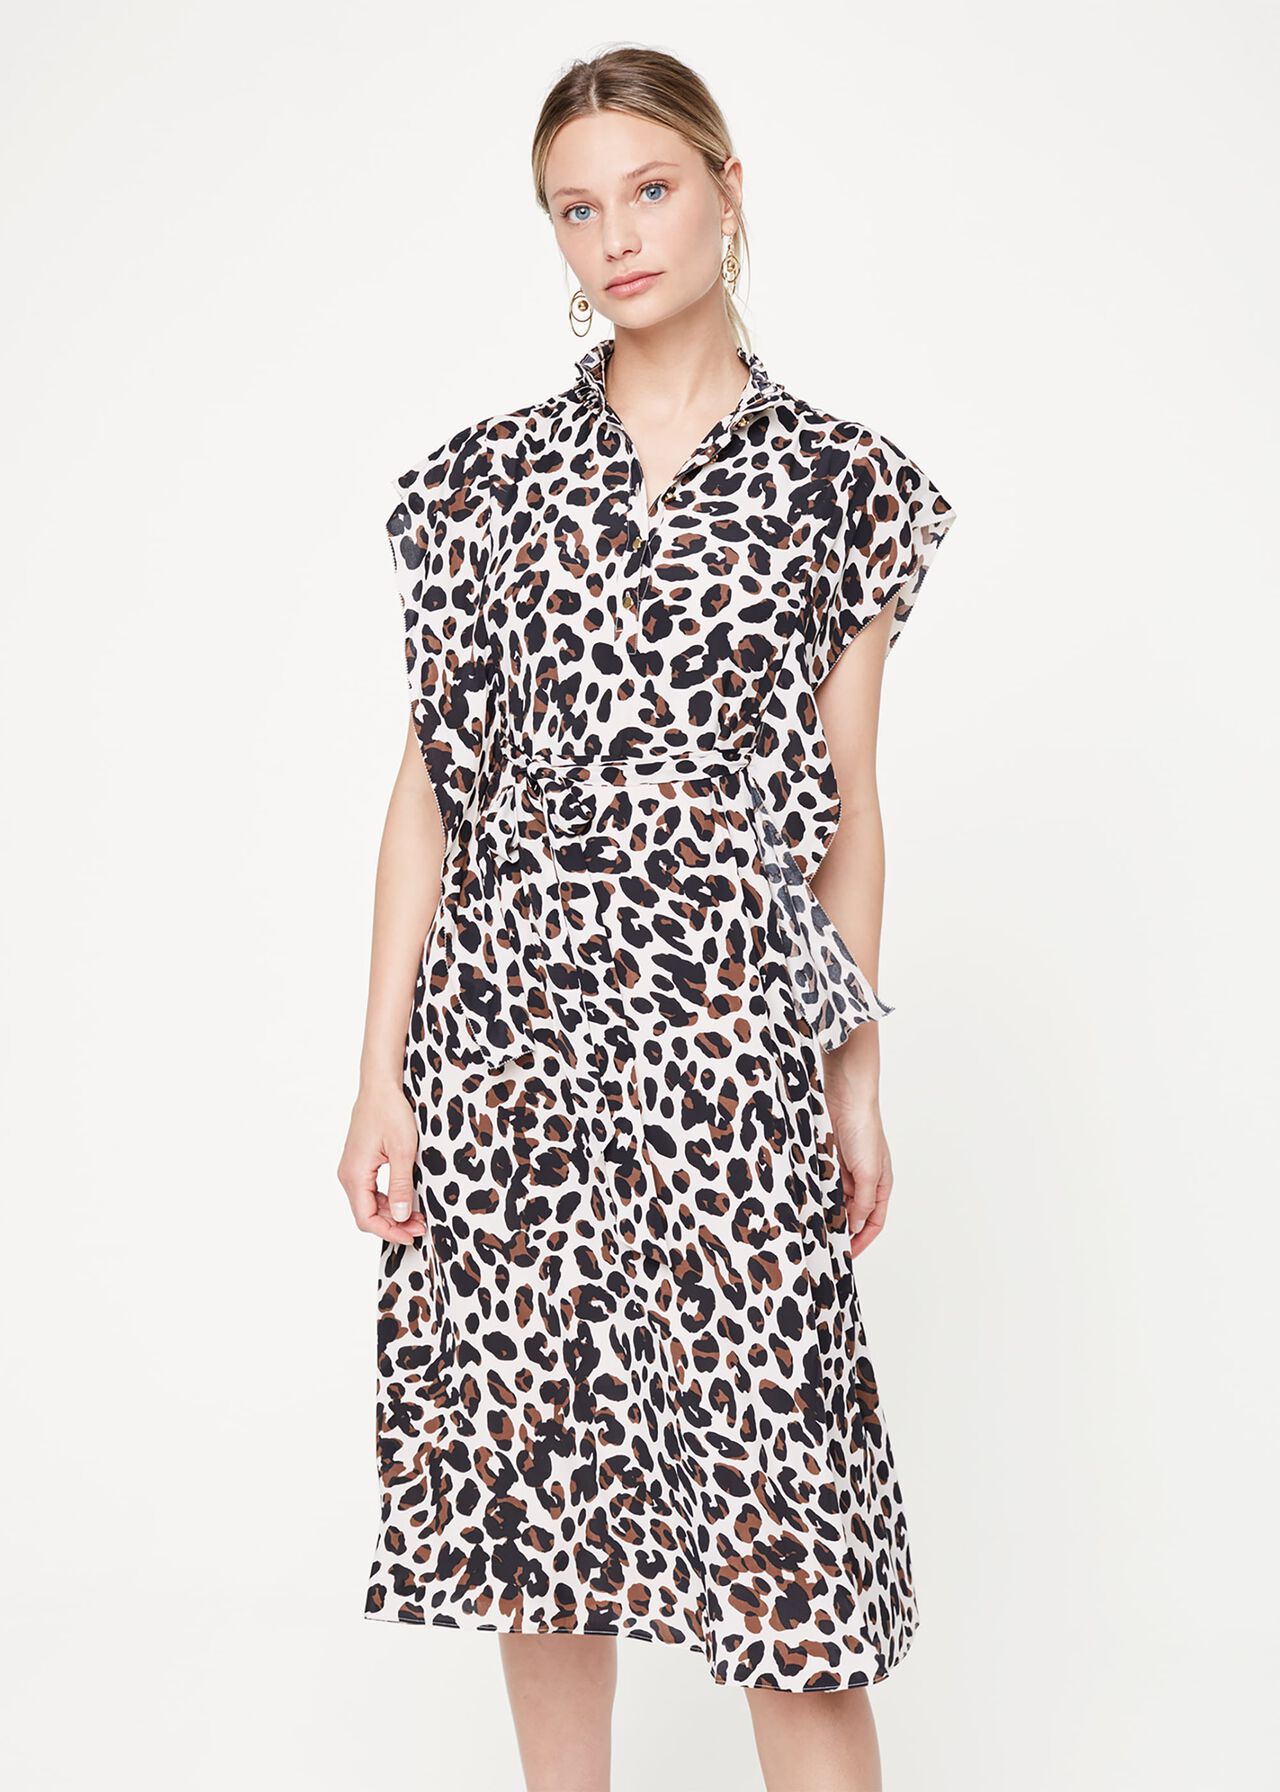 Trudy Leopard Print Dress | Phase Eight